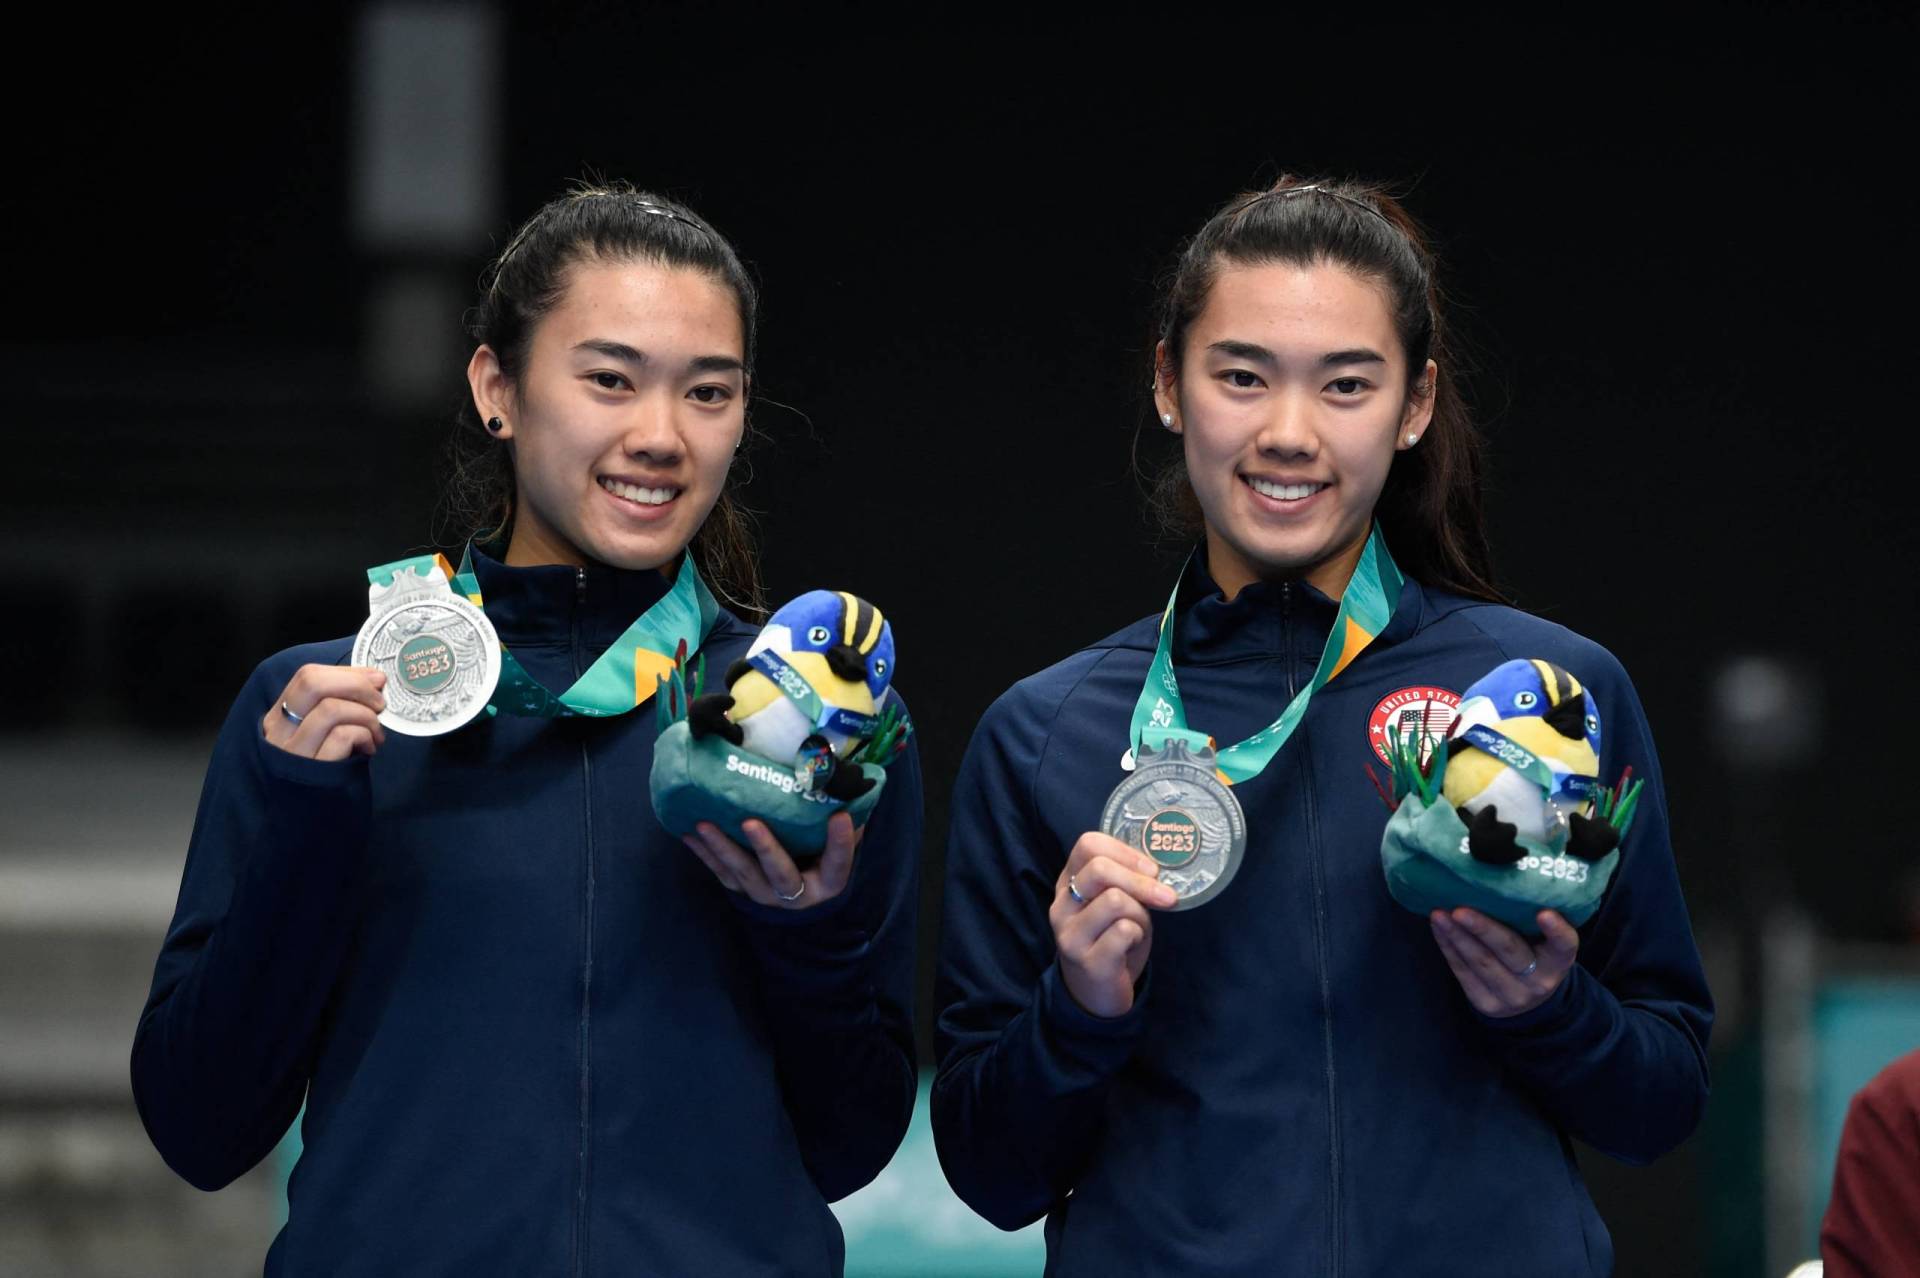 Two young women of Asian descent stand smiling together, holding up medals and commemorative toys.